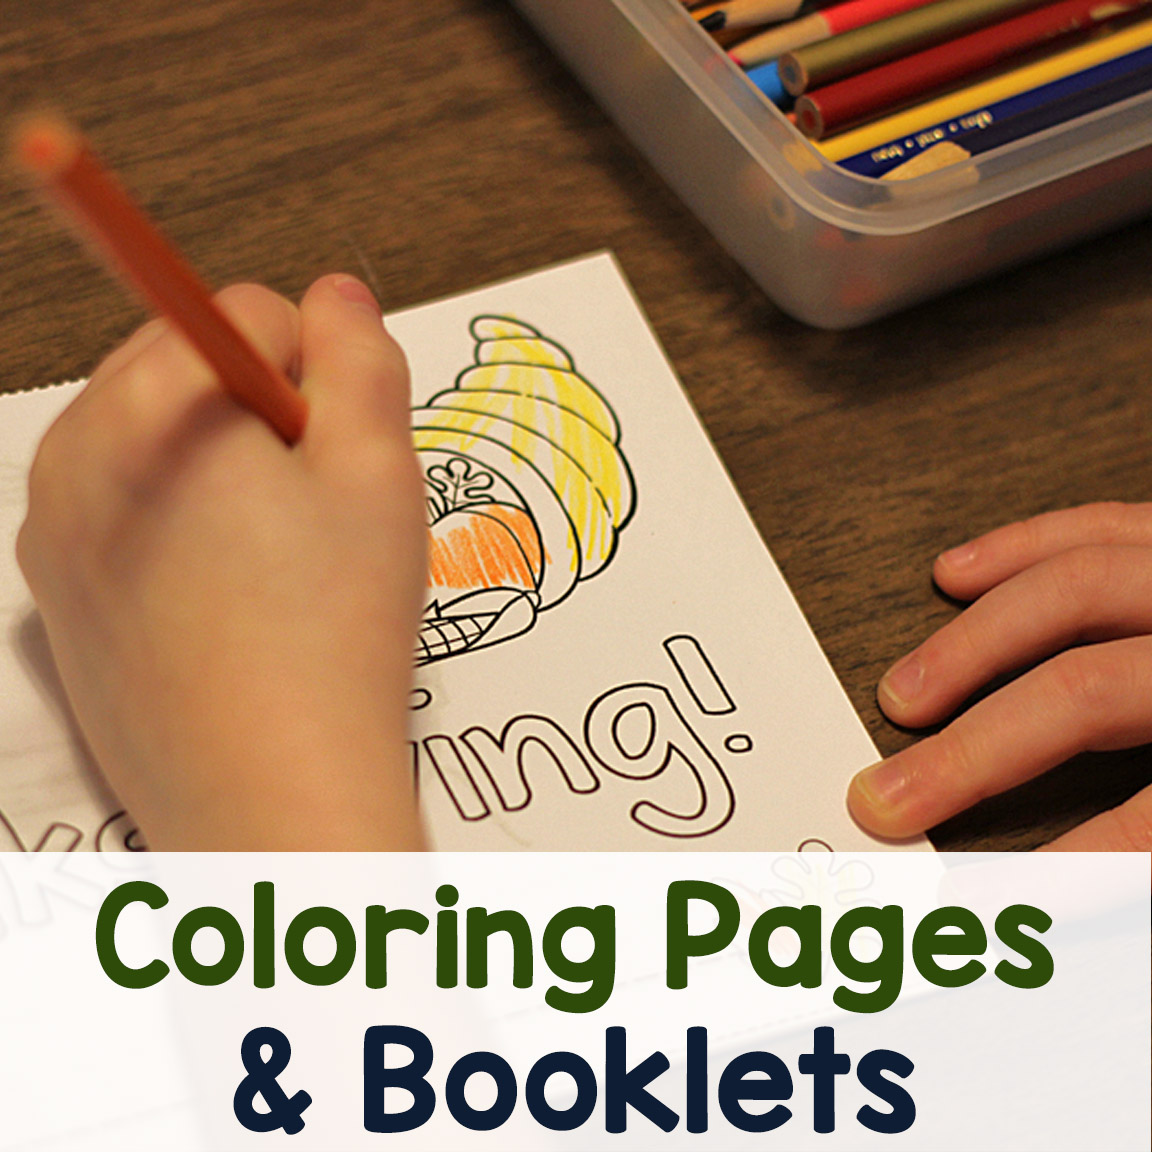 Coloring Pages and Booklets